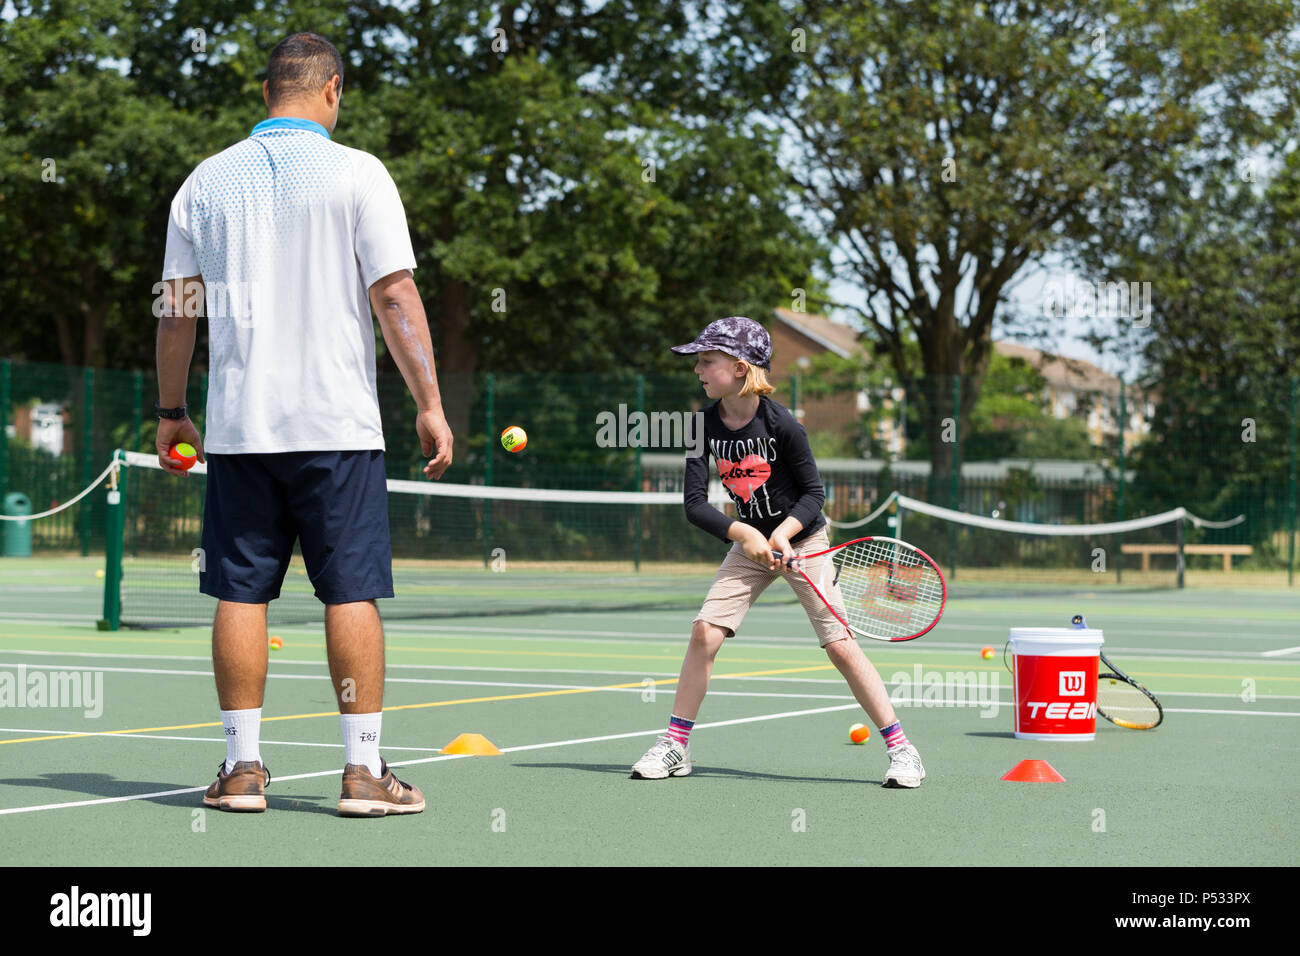 Children's tennis coaching session / lesson taking place on a full-size tennis court with kids / kids and professional tennis coach, in summer. UK. (99) Stock Photo